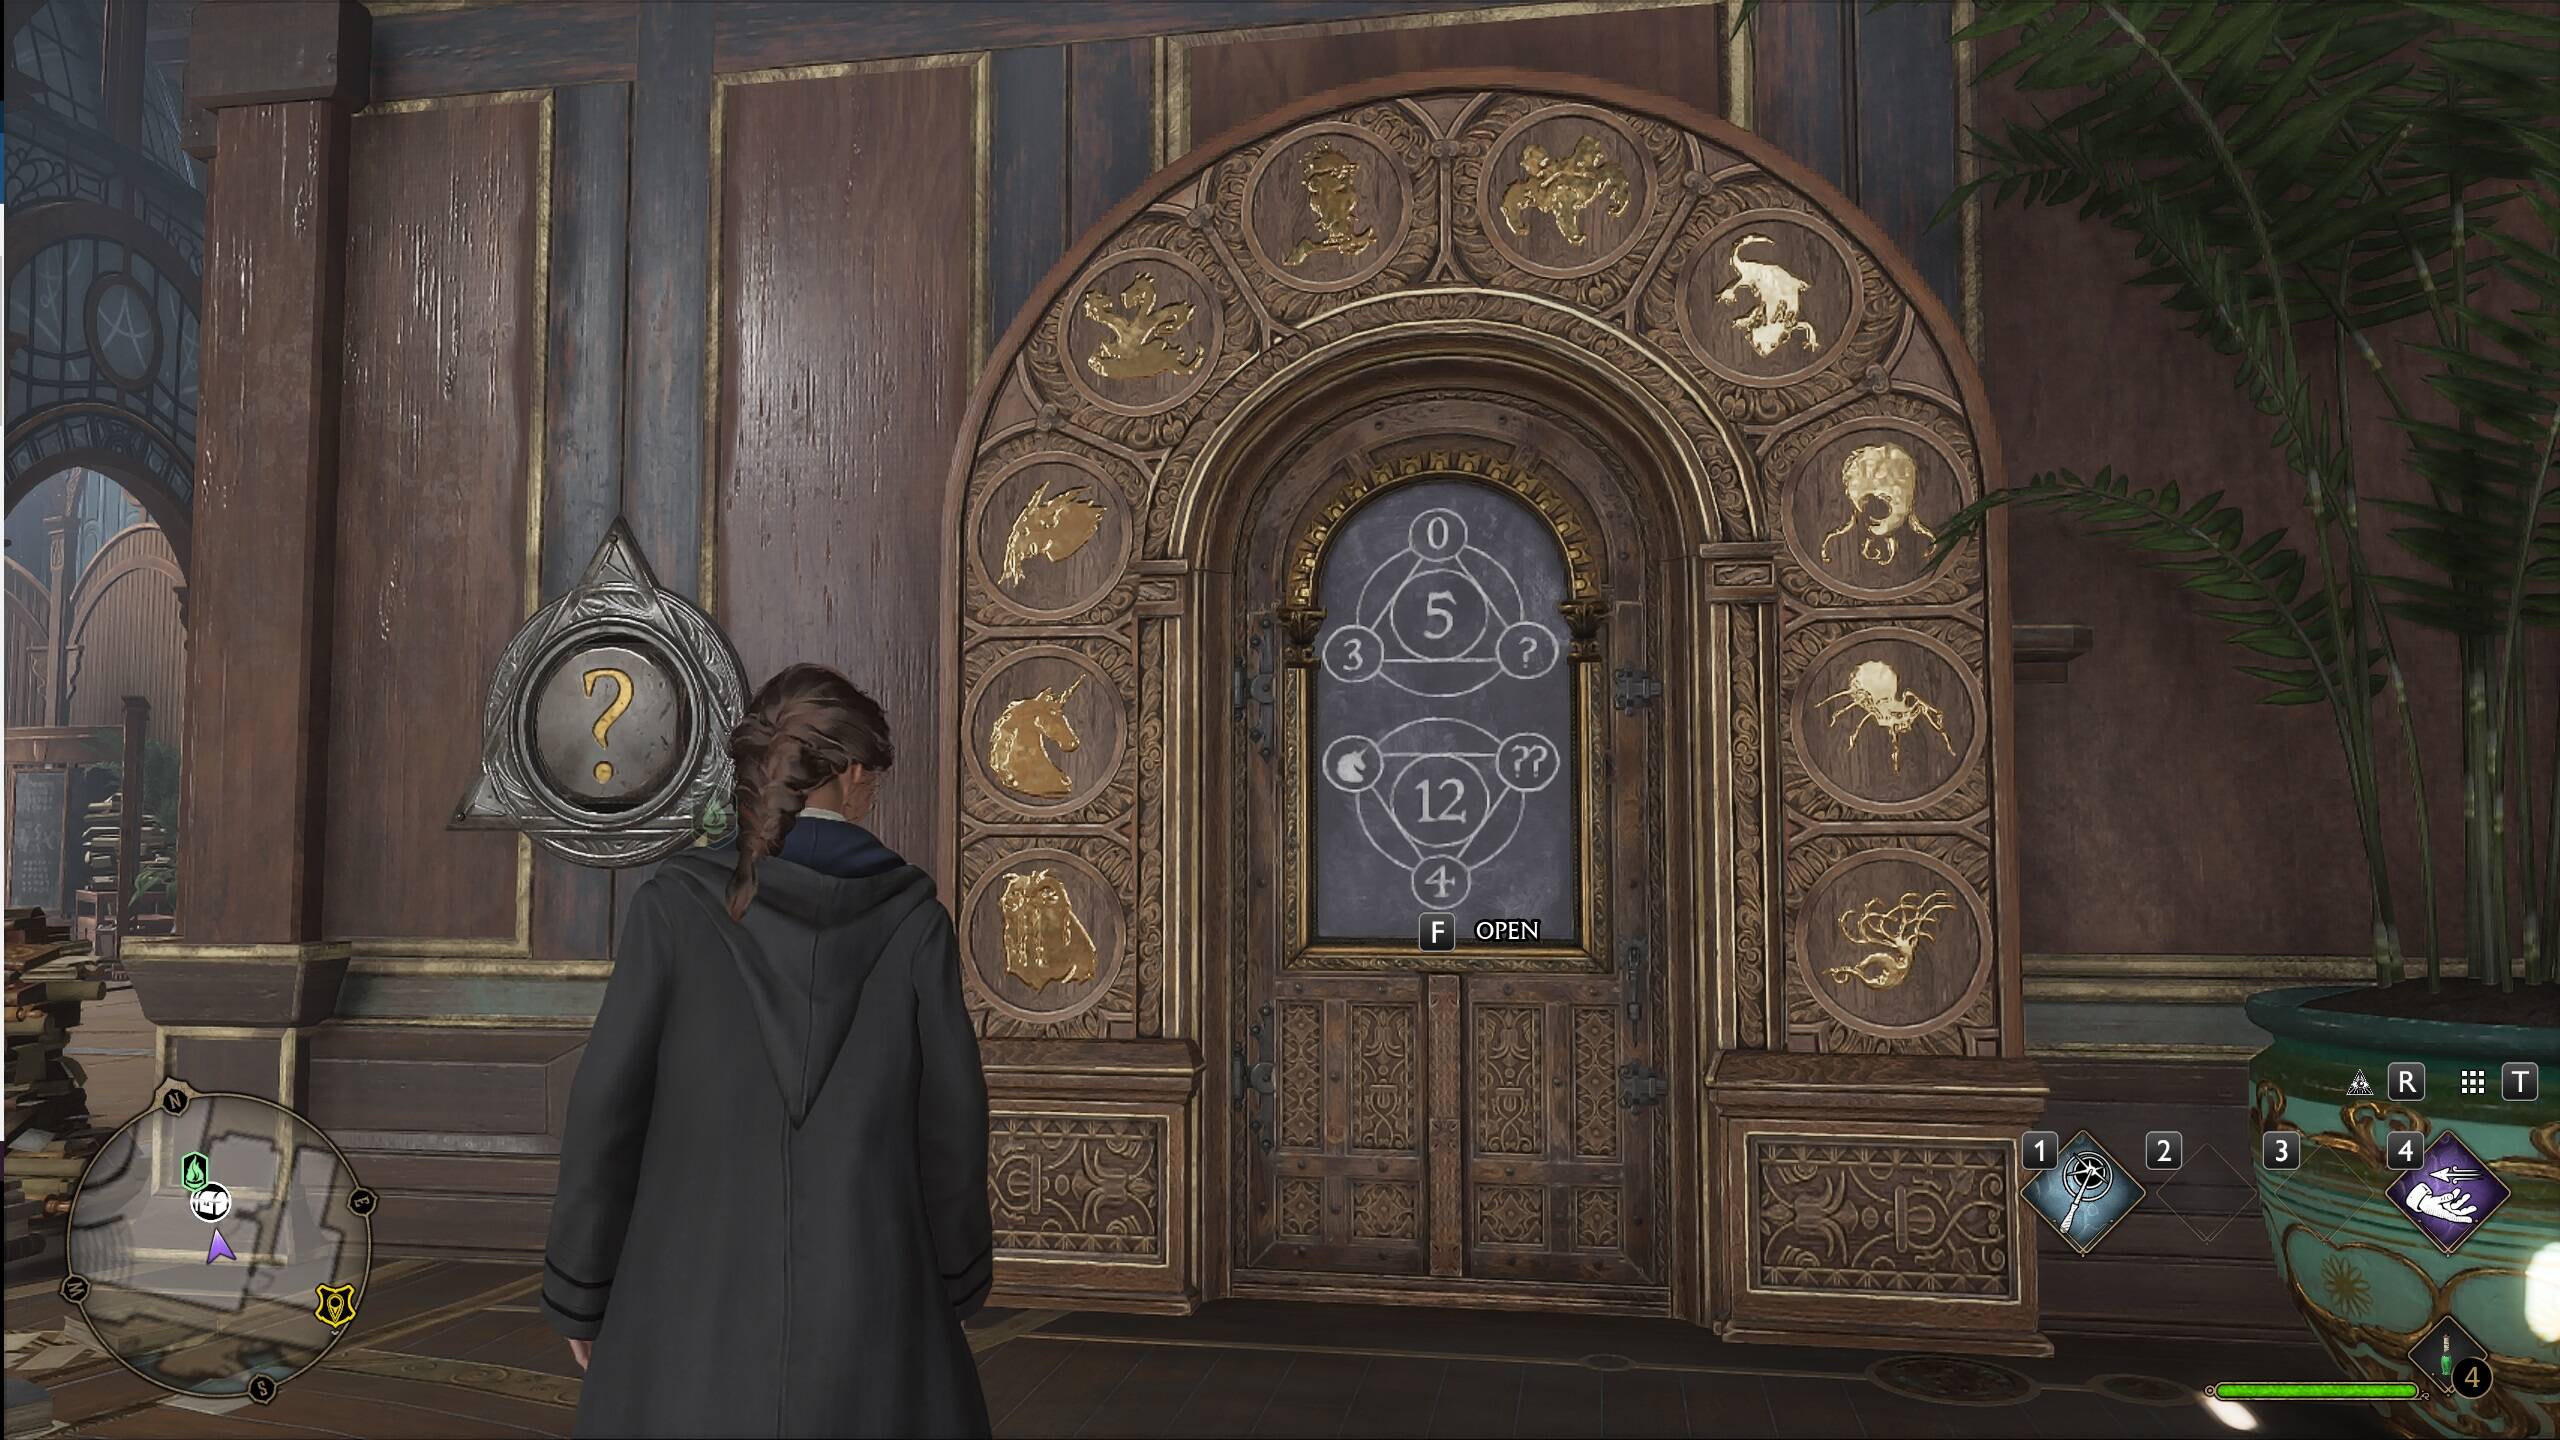 How to Open Puzzle Doors and Get Collection Chests in Hogwarts Legacy 